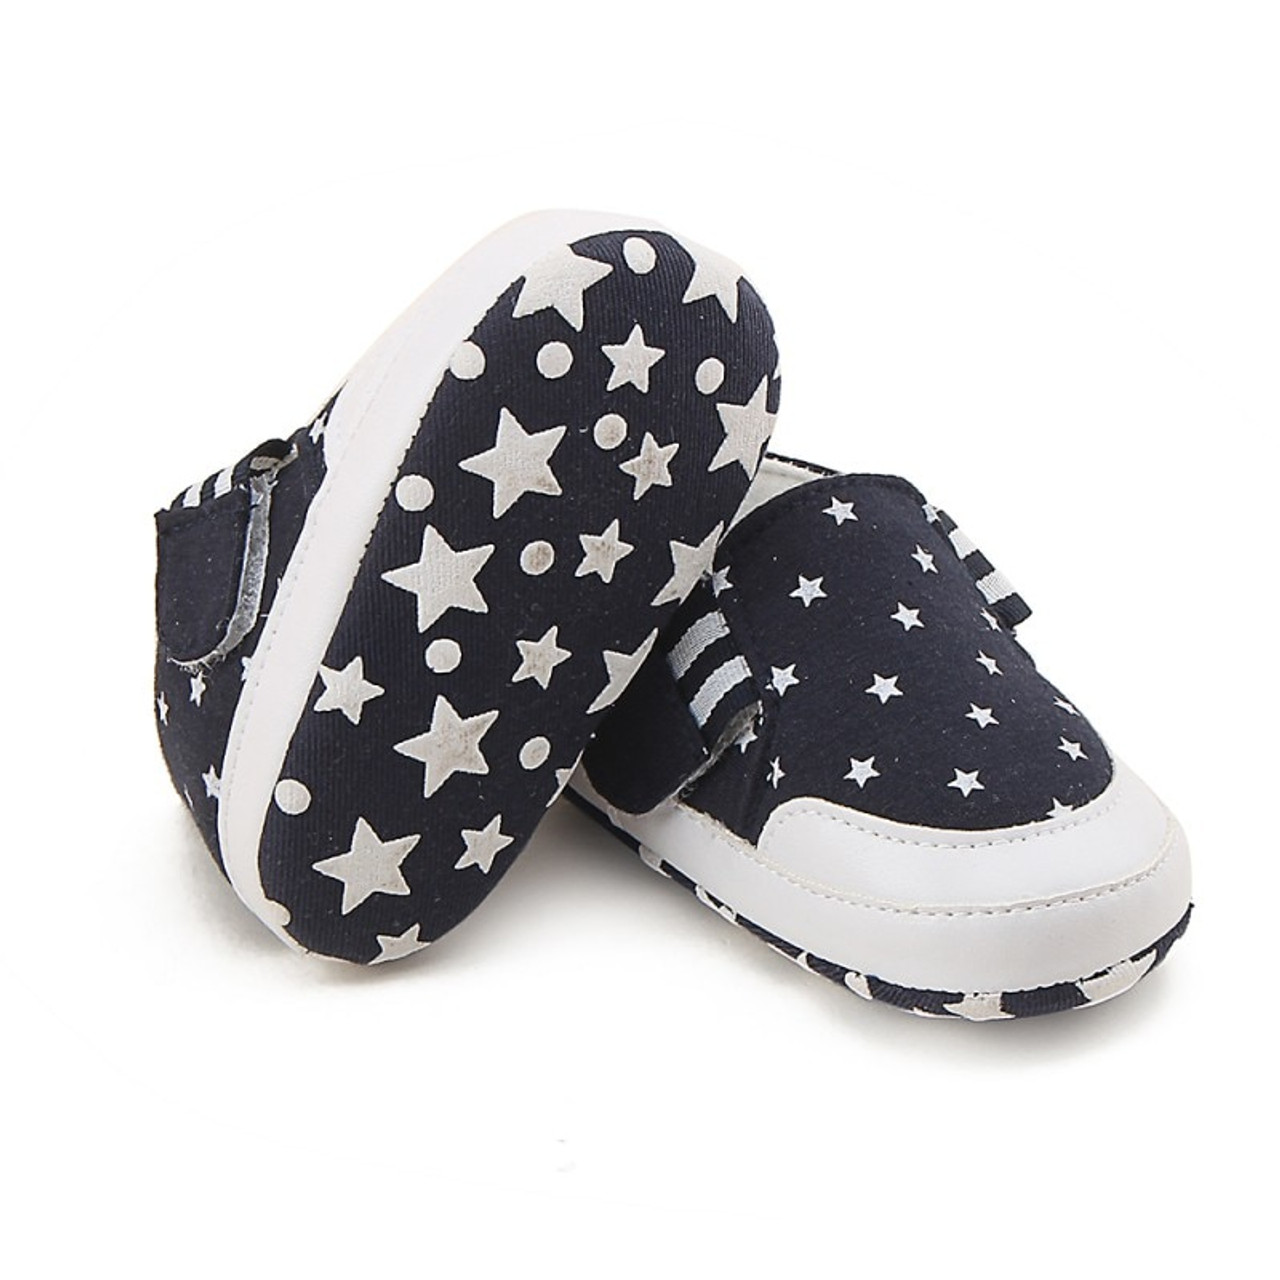 infant sneakers on sale